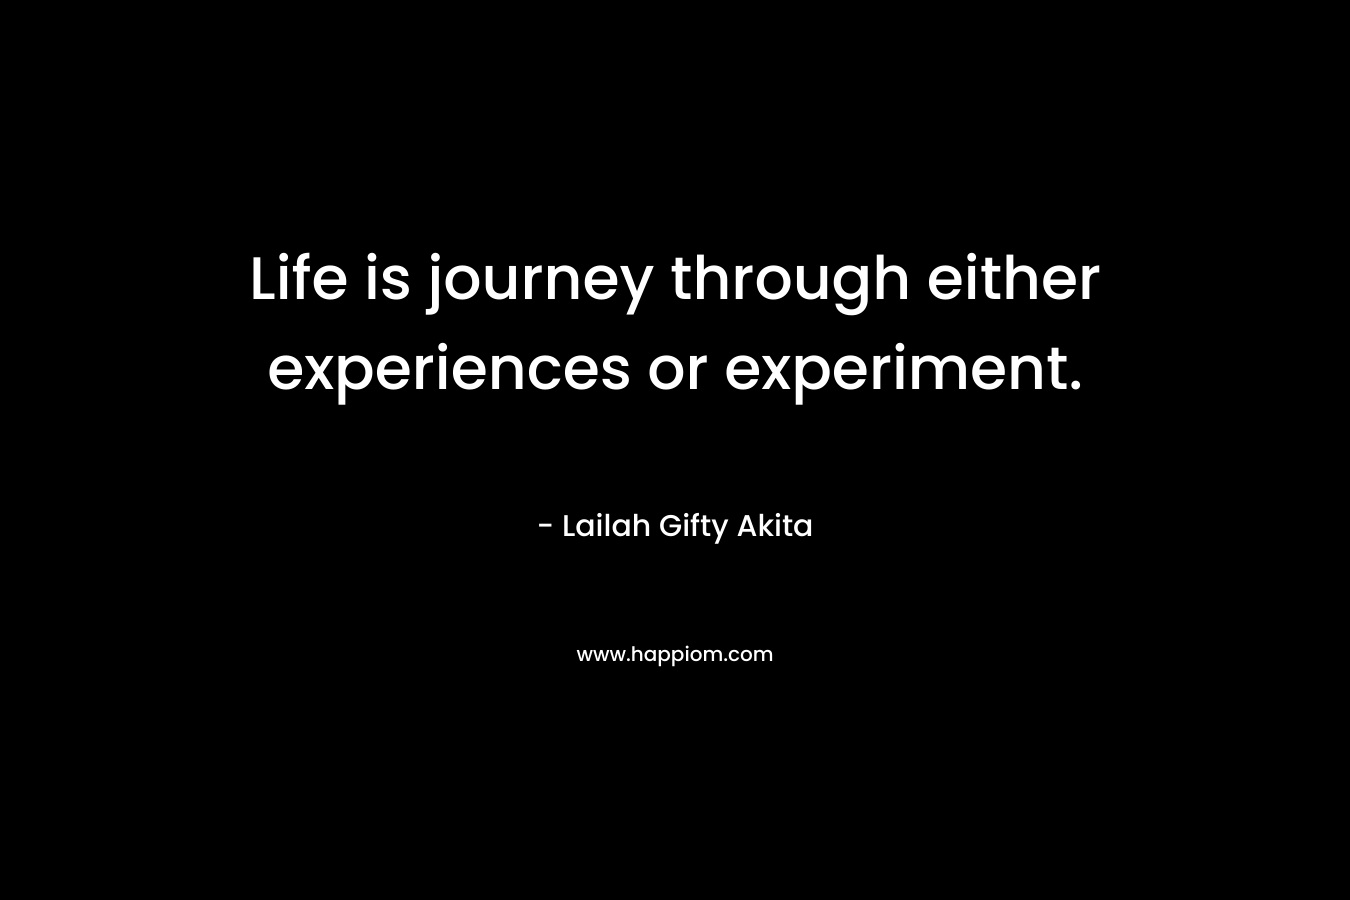 Life is journey through either experiences or experiment. – Lailah Gifty Akita